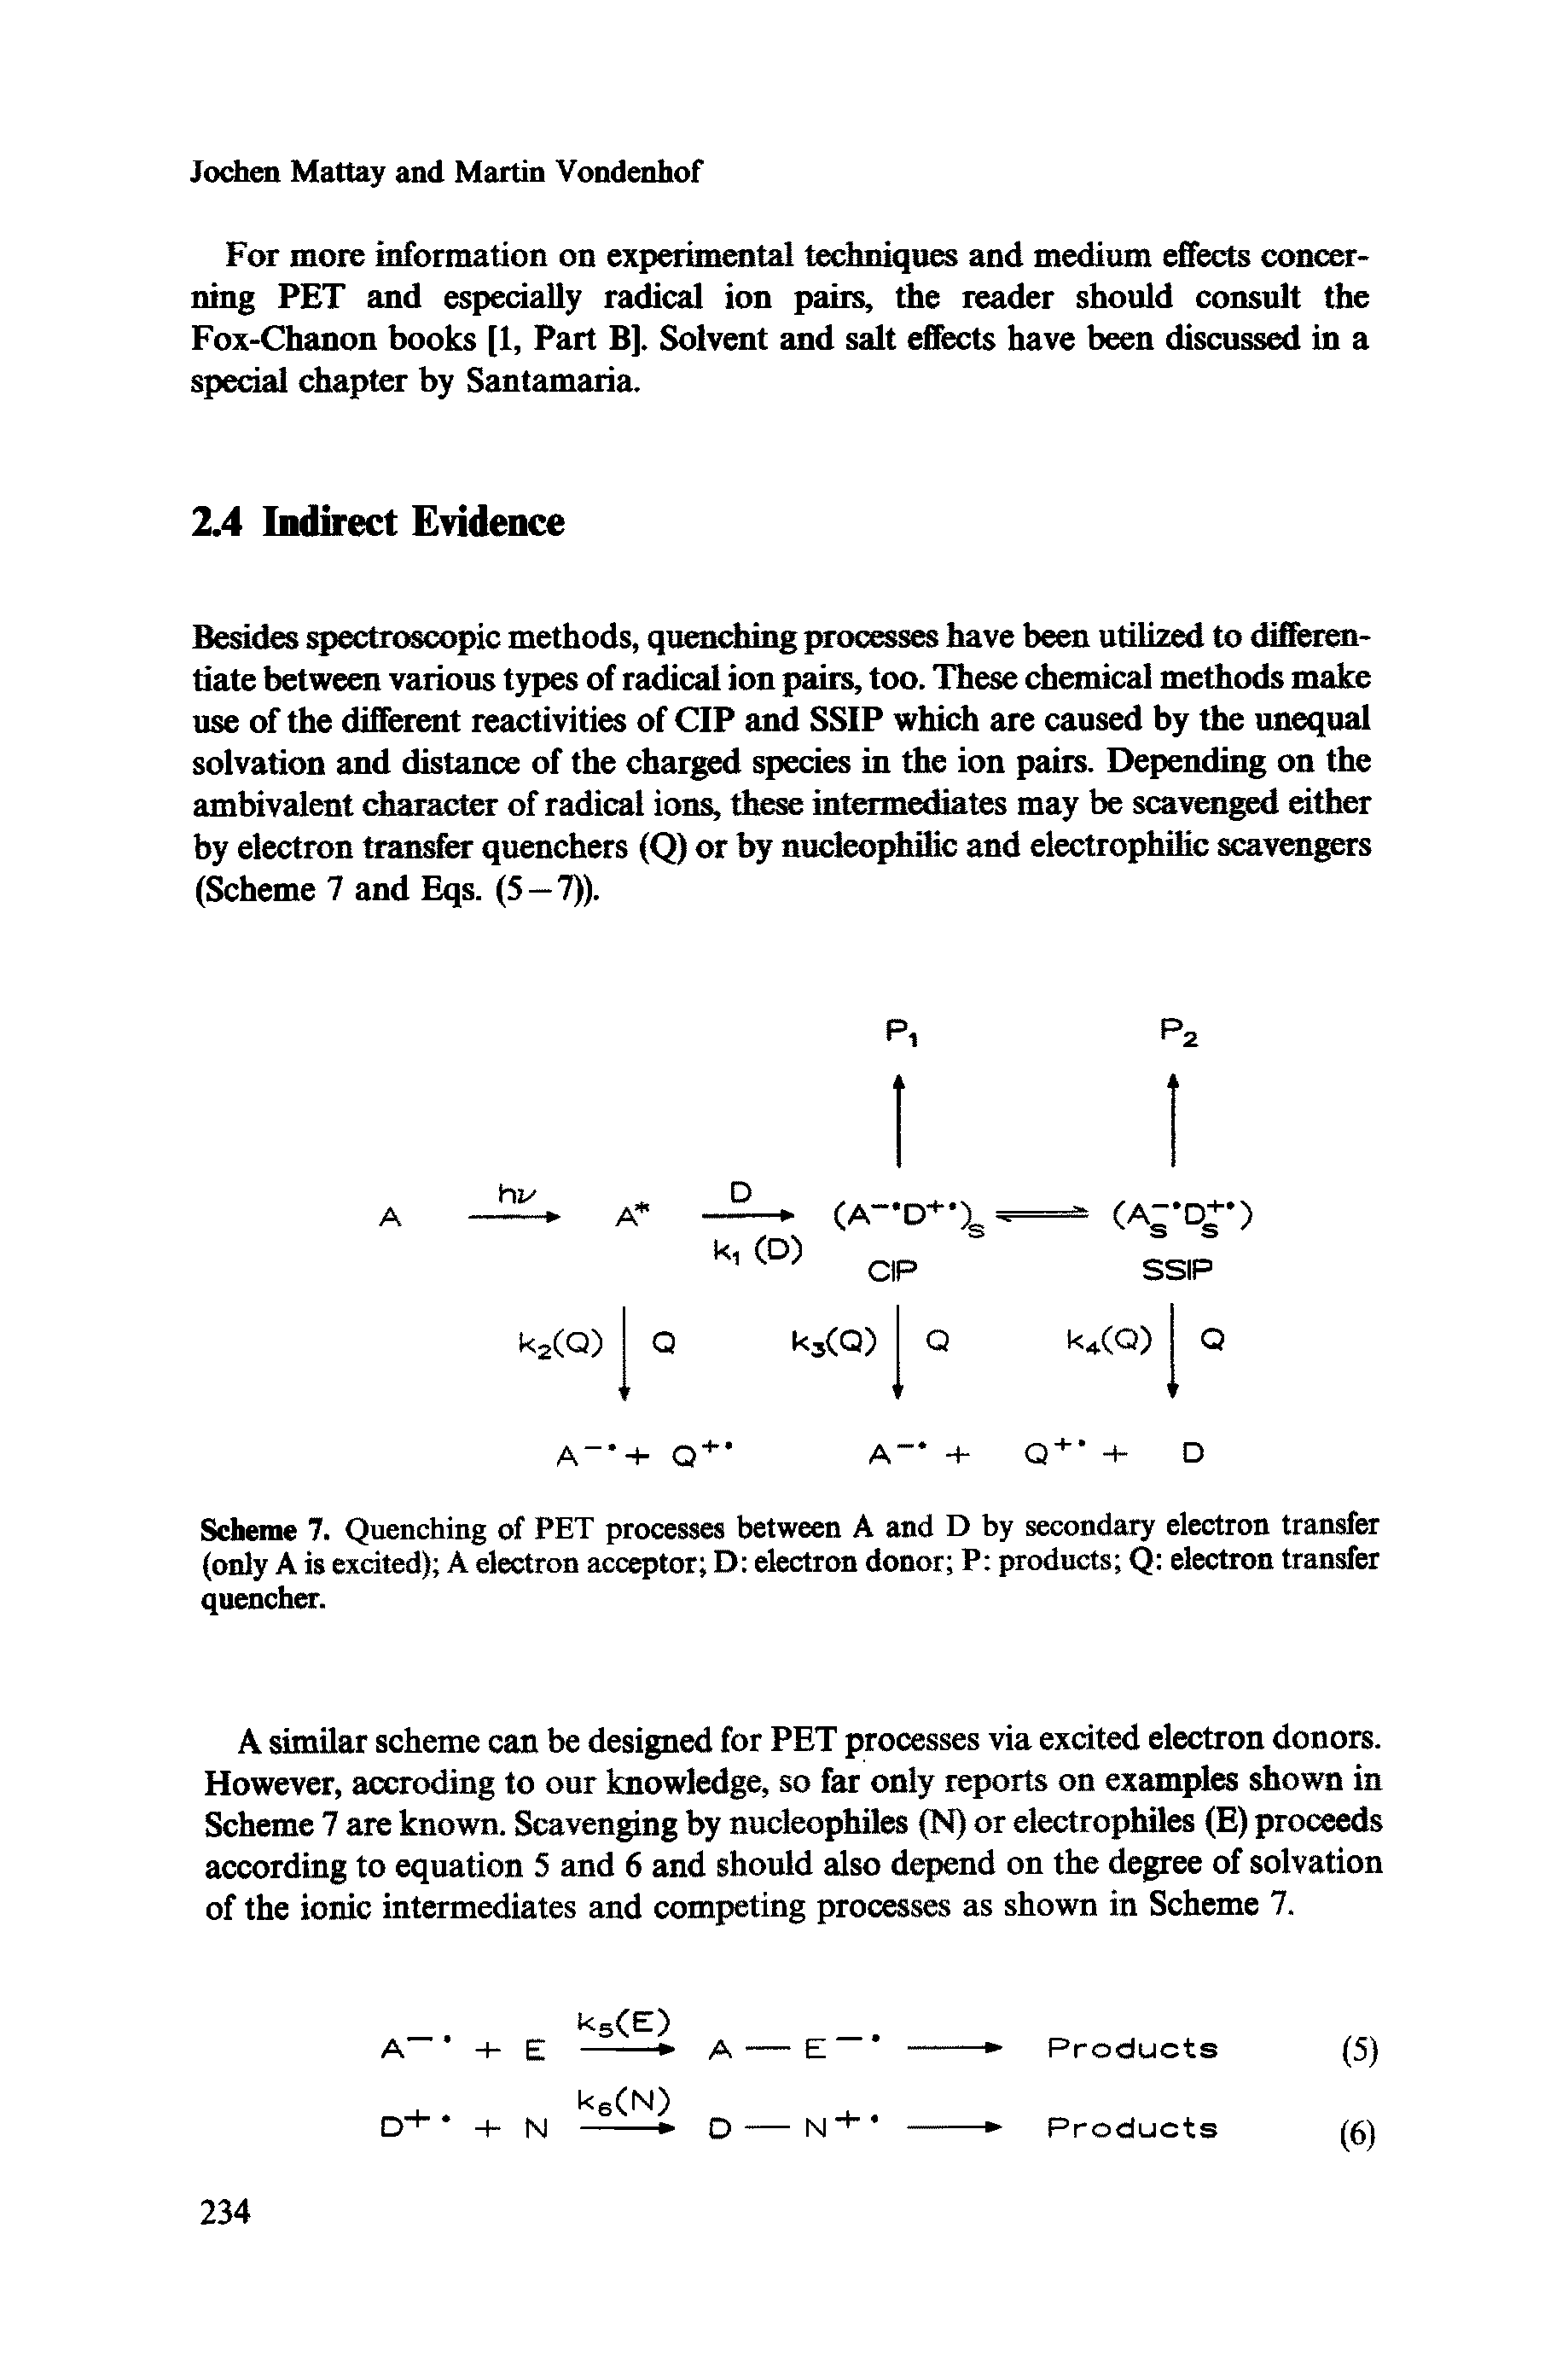 Scheme 7. Quenching of PET processes between A and D by secondary electron transfer (only A is excited) A electron acceptor D electron donor P products Q electron transfer quencher.